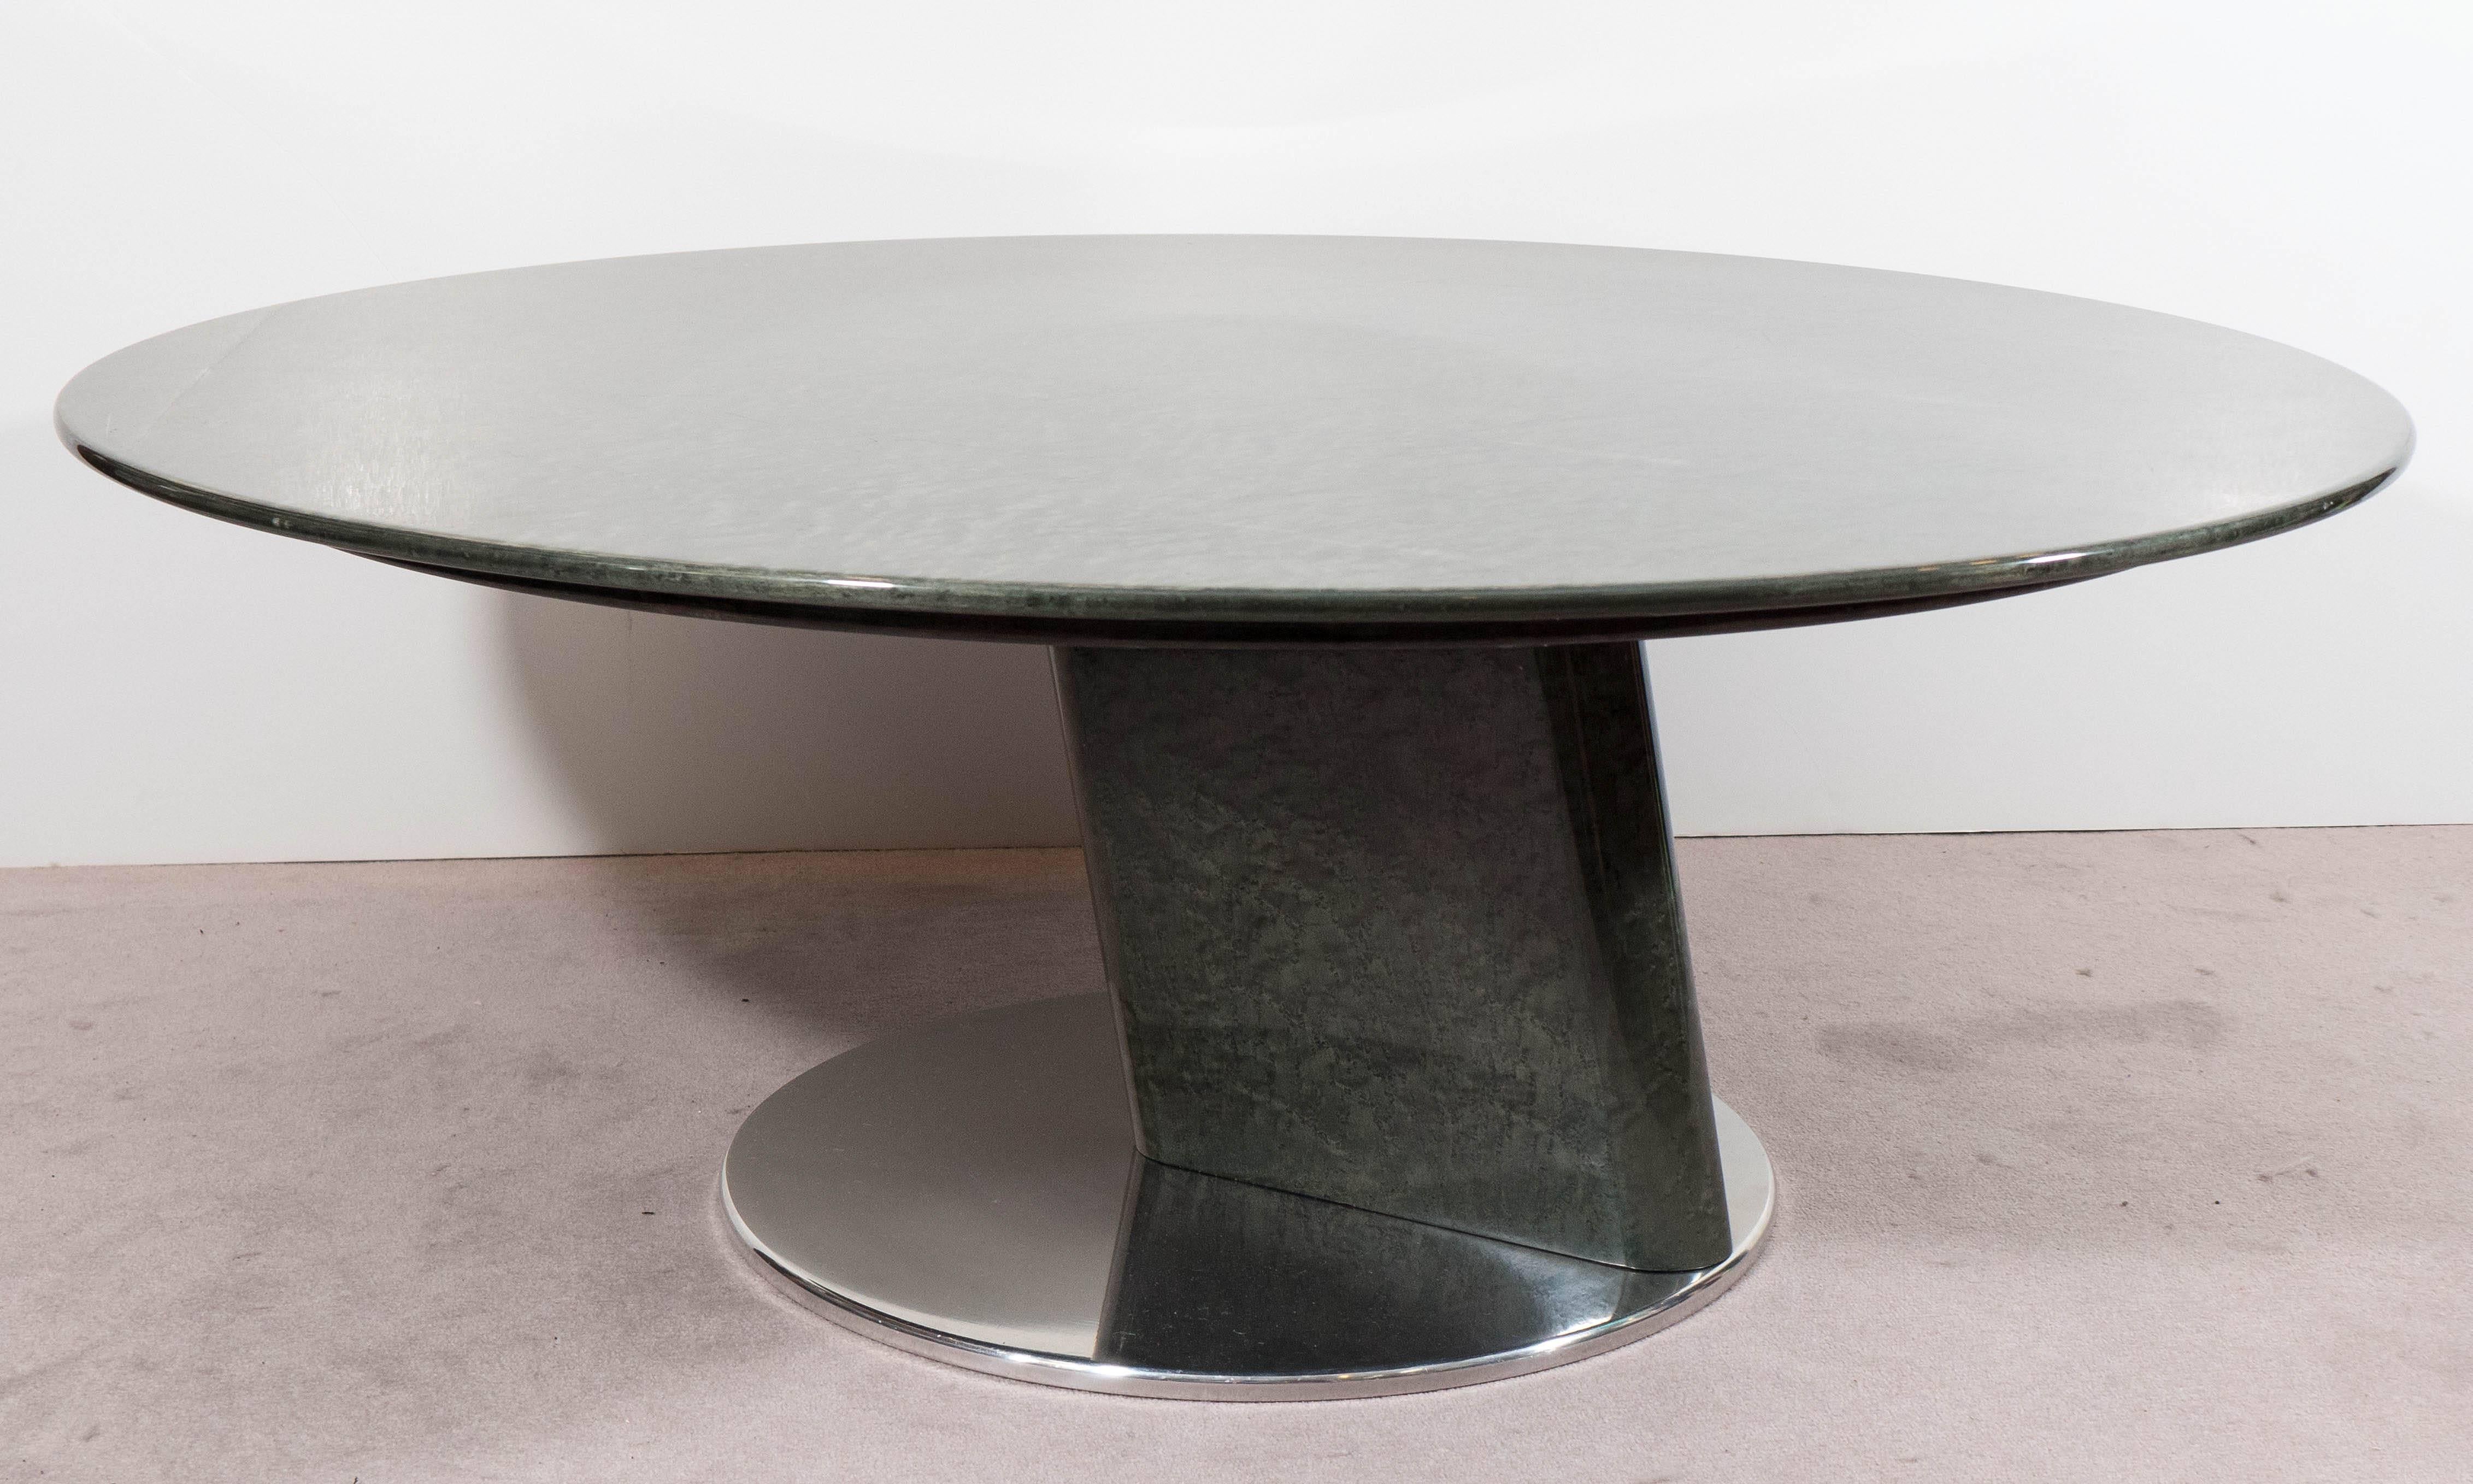 A round, green lacquered bird's-eye maple coffee table by Saporiti, produced in Italy circa 1980s, set above a smaller circular steel base. Good condition, consistent with age and use, with minimal scratches to the surface.